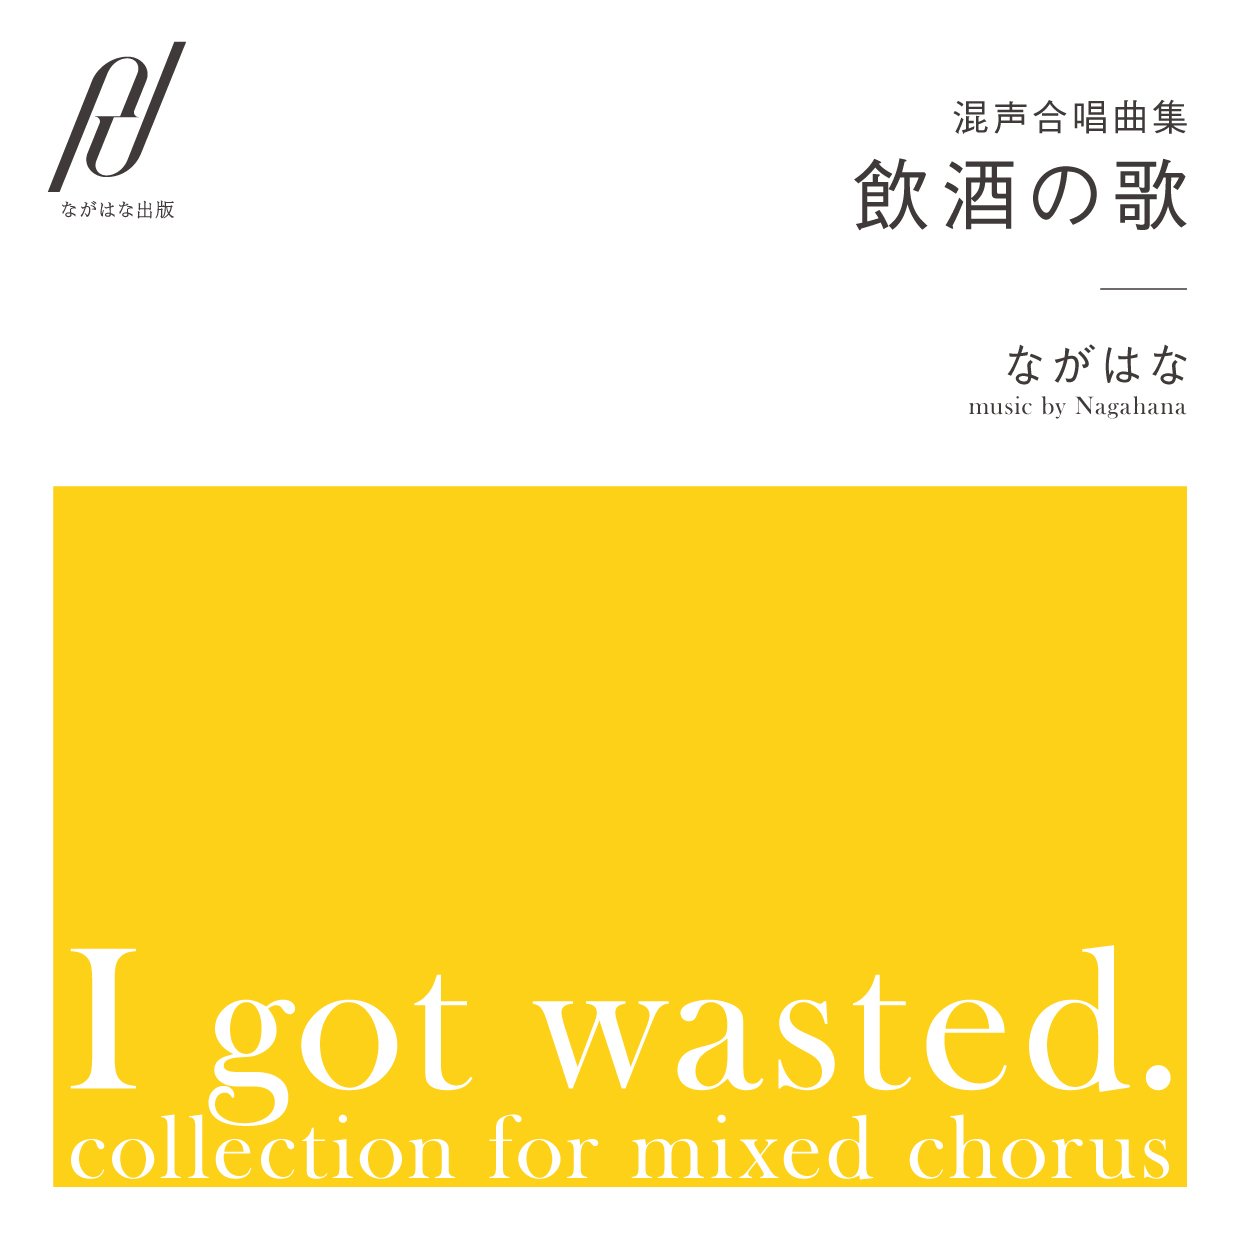 <High resolution version> "I got wasted" For mixed chorus